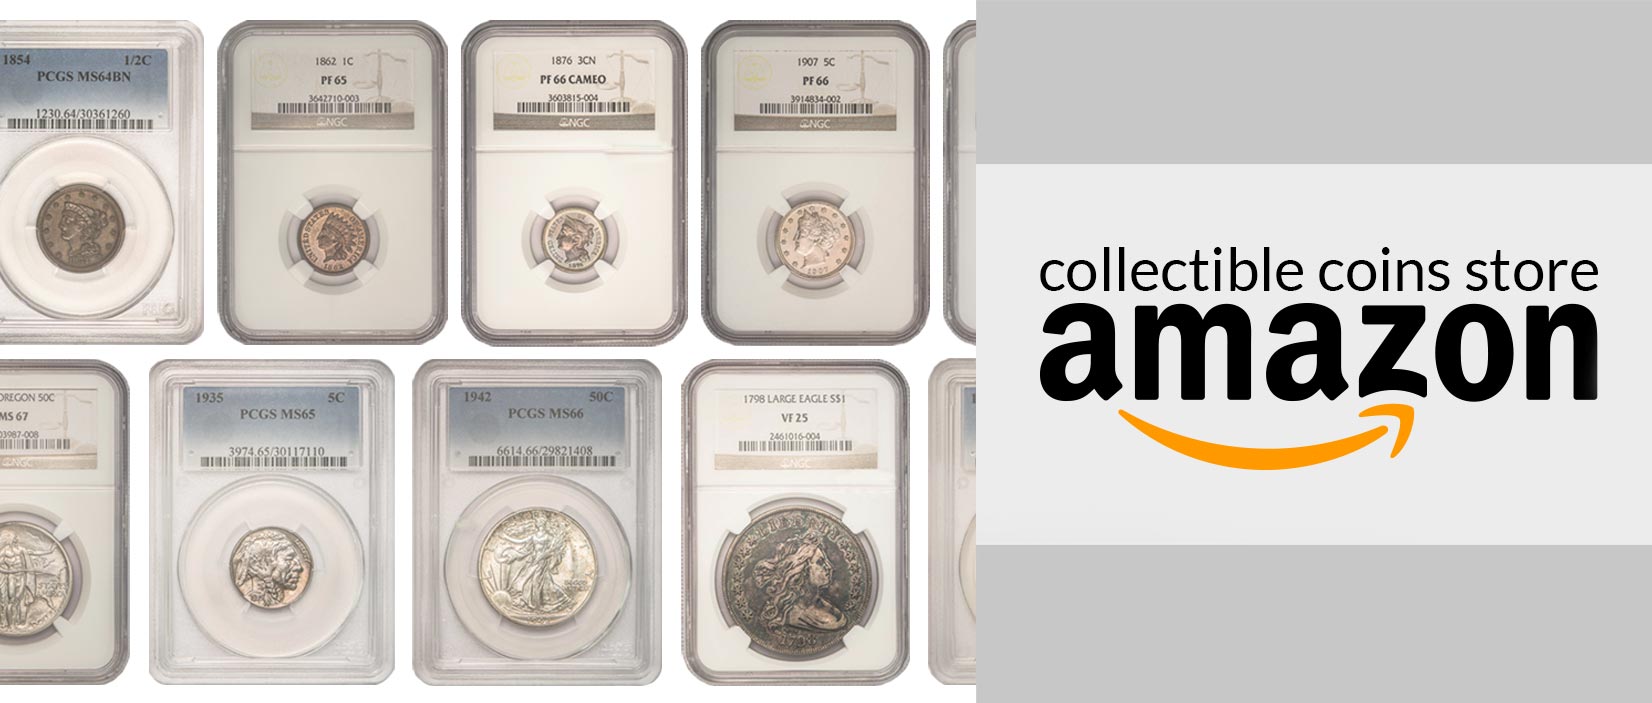 Texas Precious Metals Announces the Launch of its Amazon.com Coins and Collectibles Store with $2.3M in Inventory